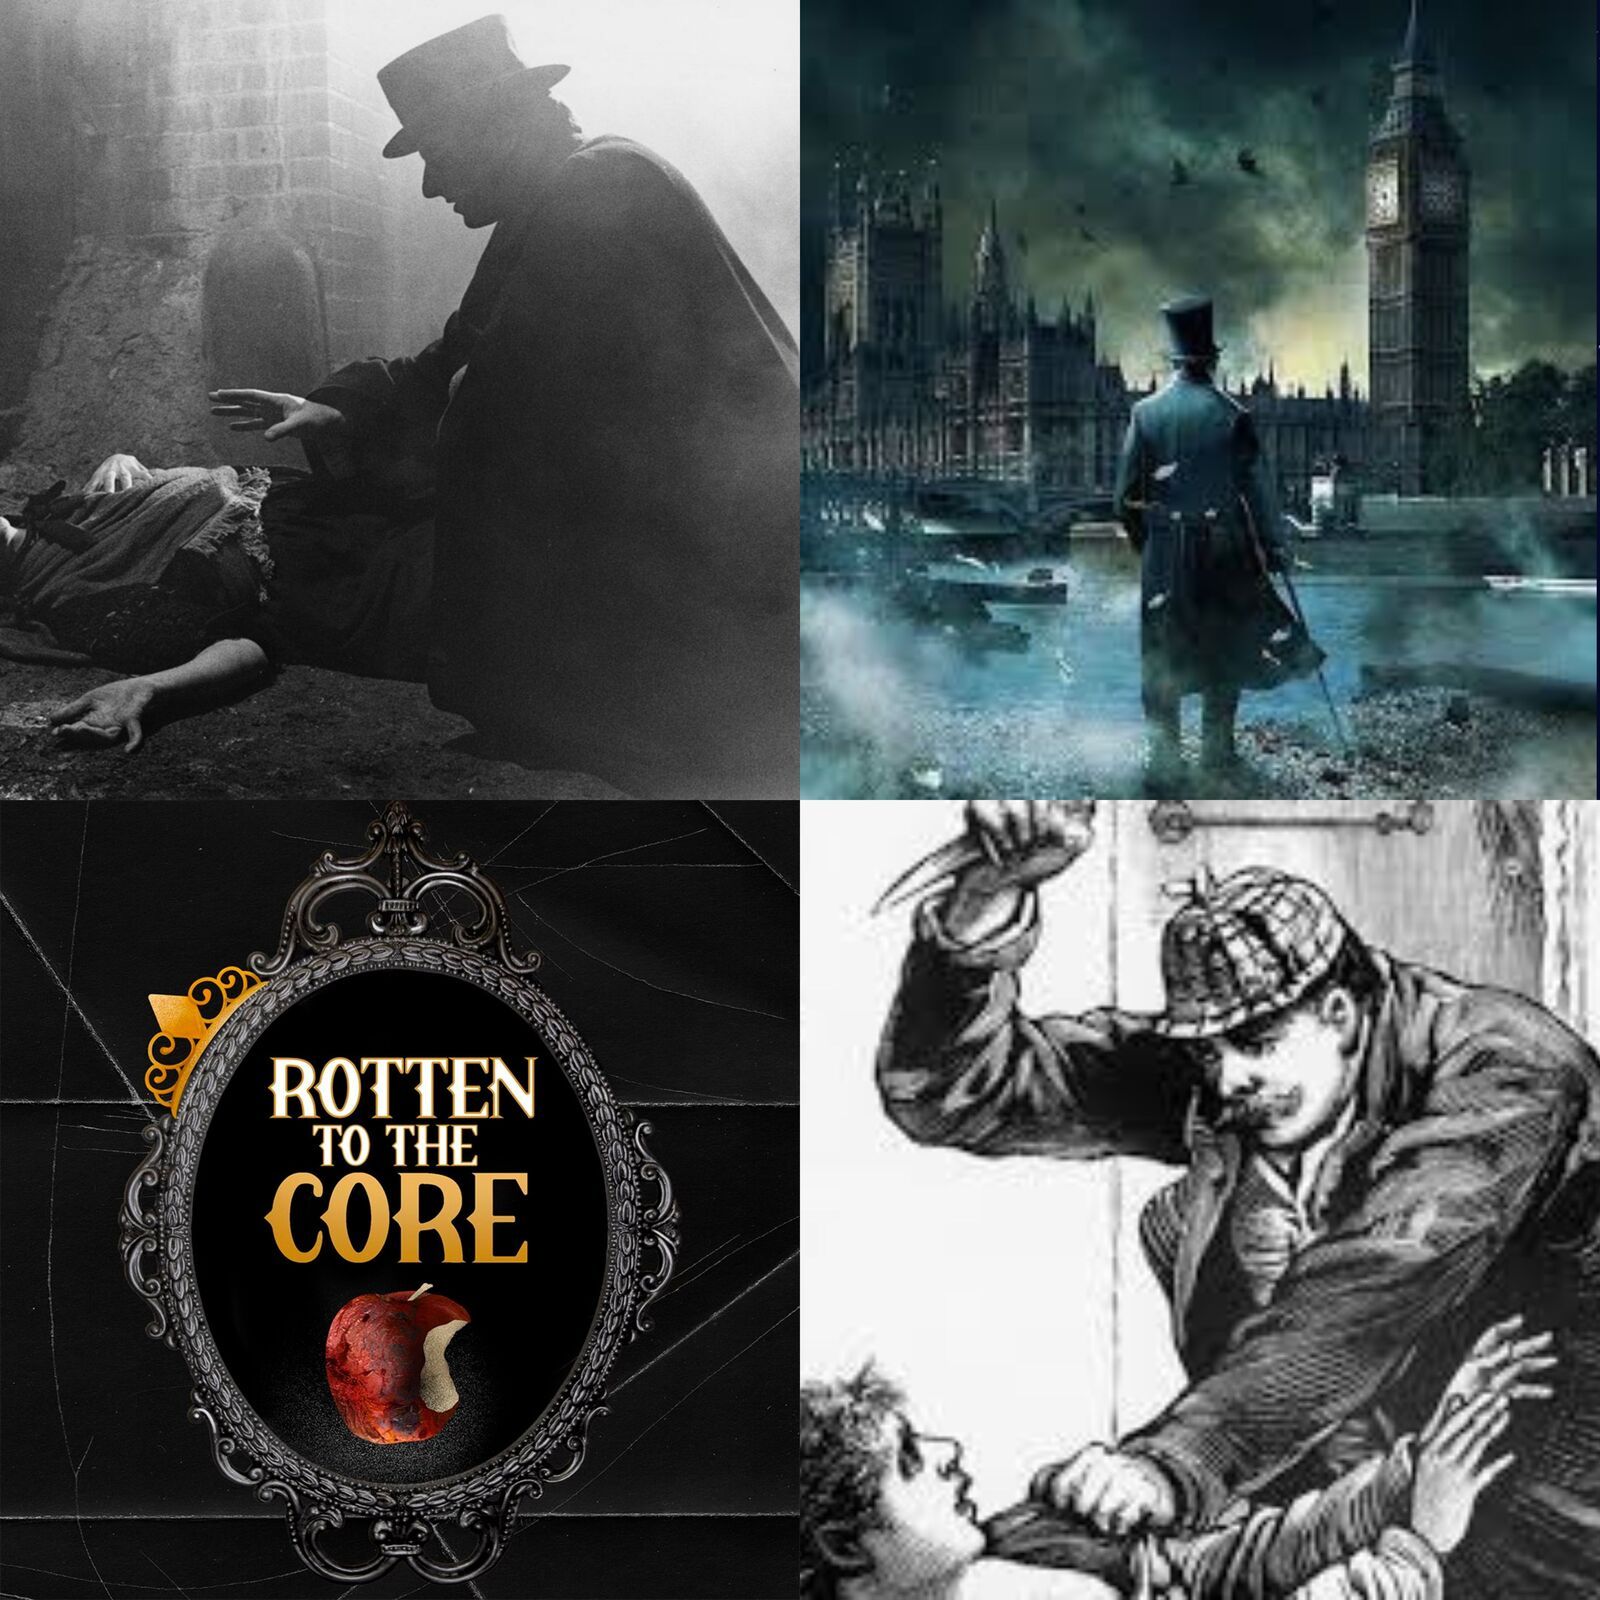 27: Jack the Ripper; Little Games of Horror